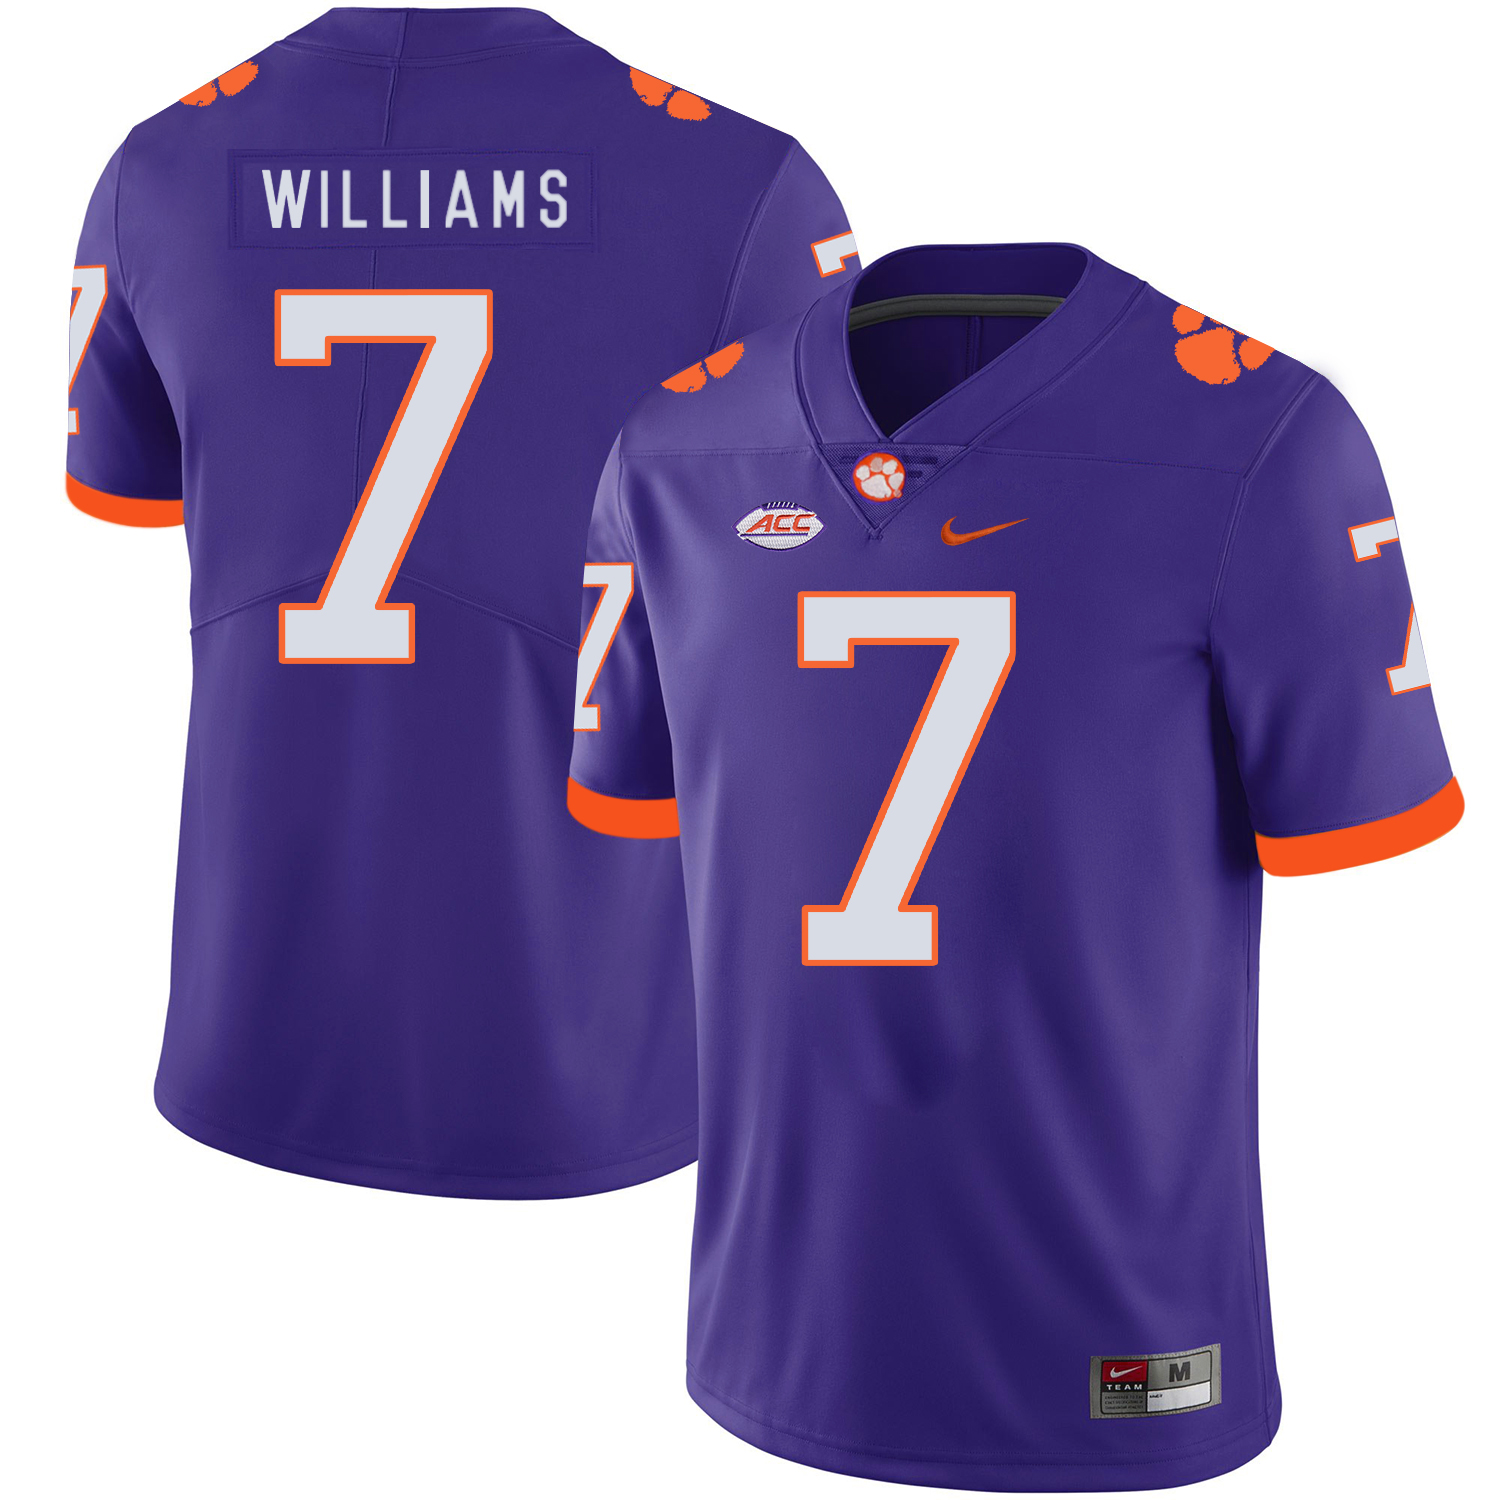 Clemson Tigers 7 Mike Williams Purple Nike College Football Jersey